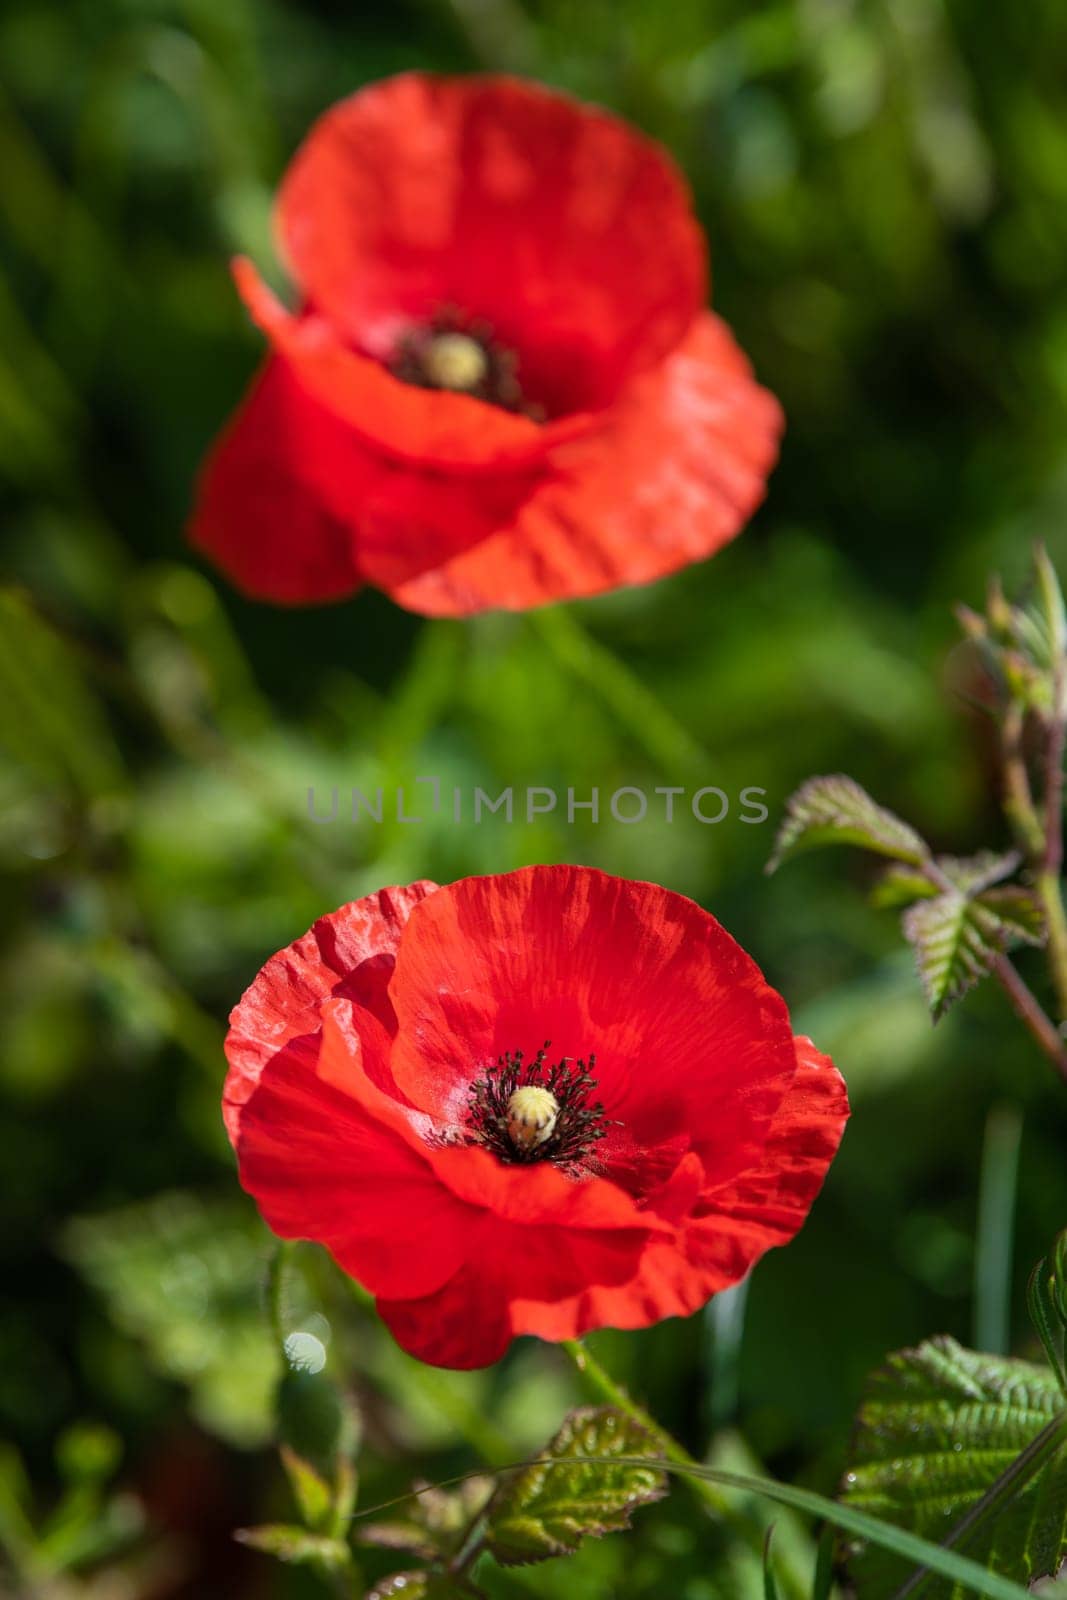 Field of wild poppies, beautiful summer rural landscape. Fresh green meadow with bright red flowers, sunny day. High quality photo